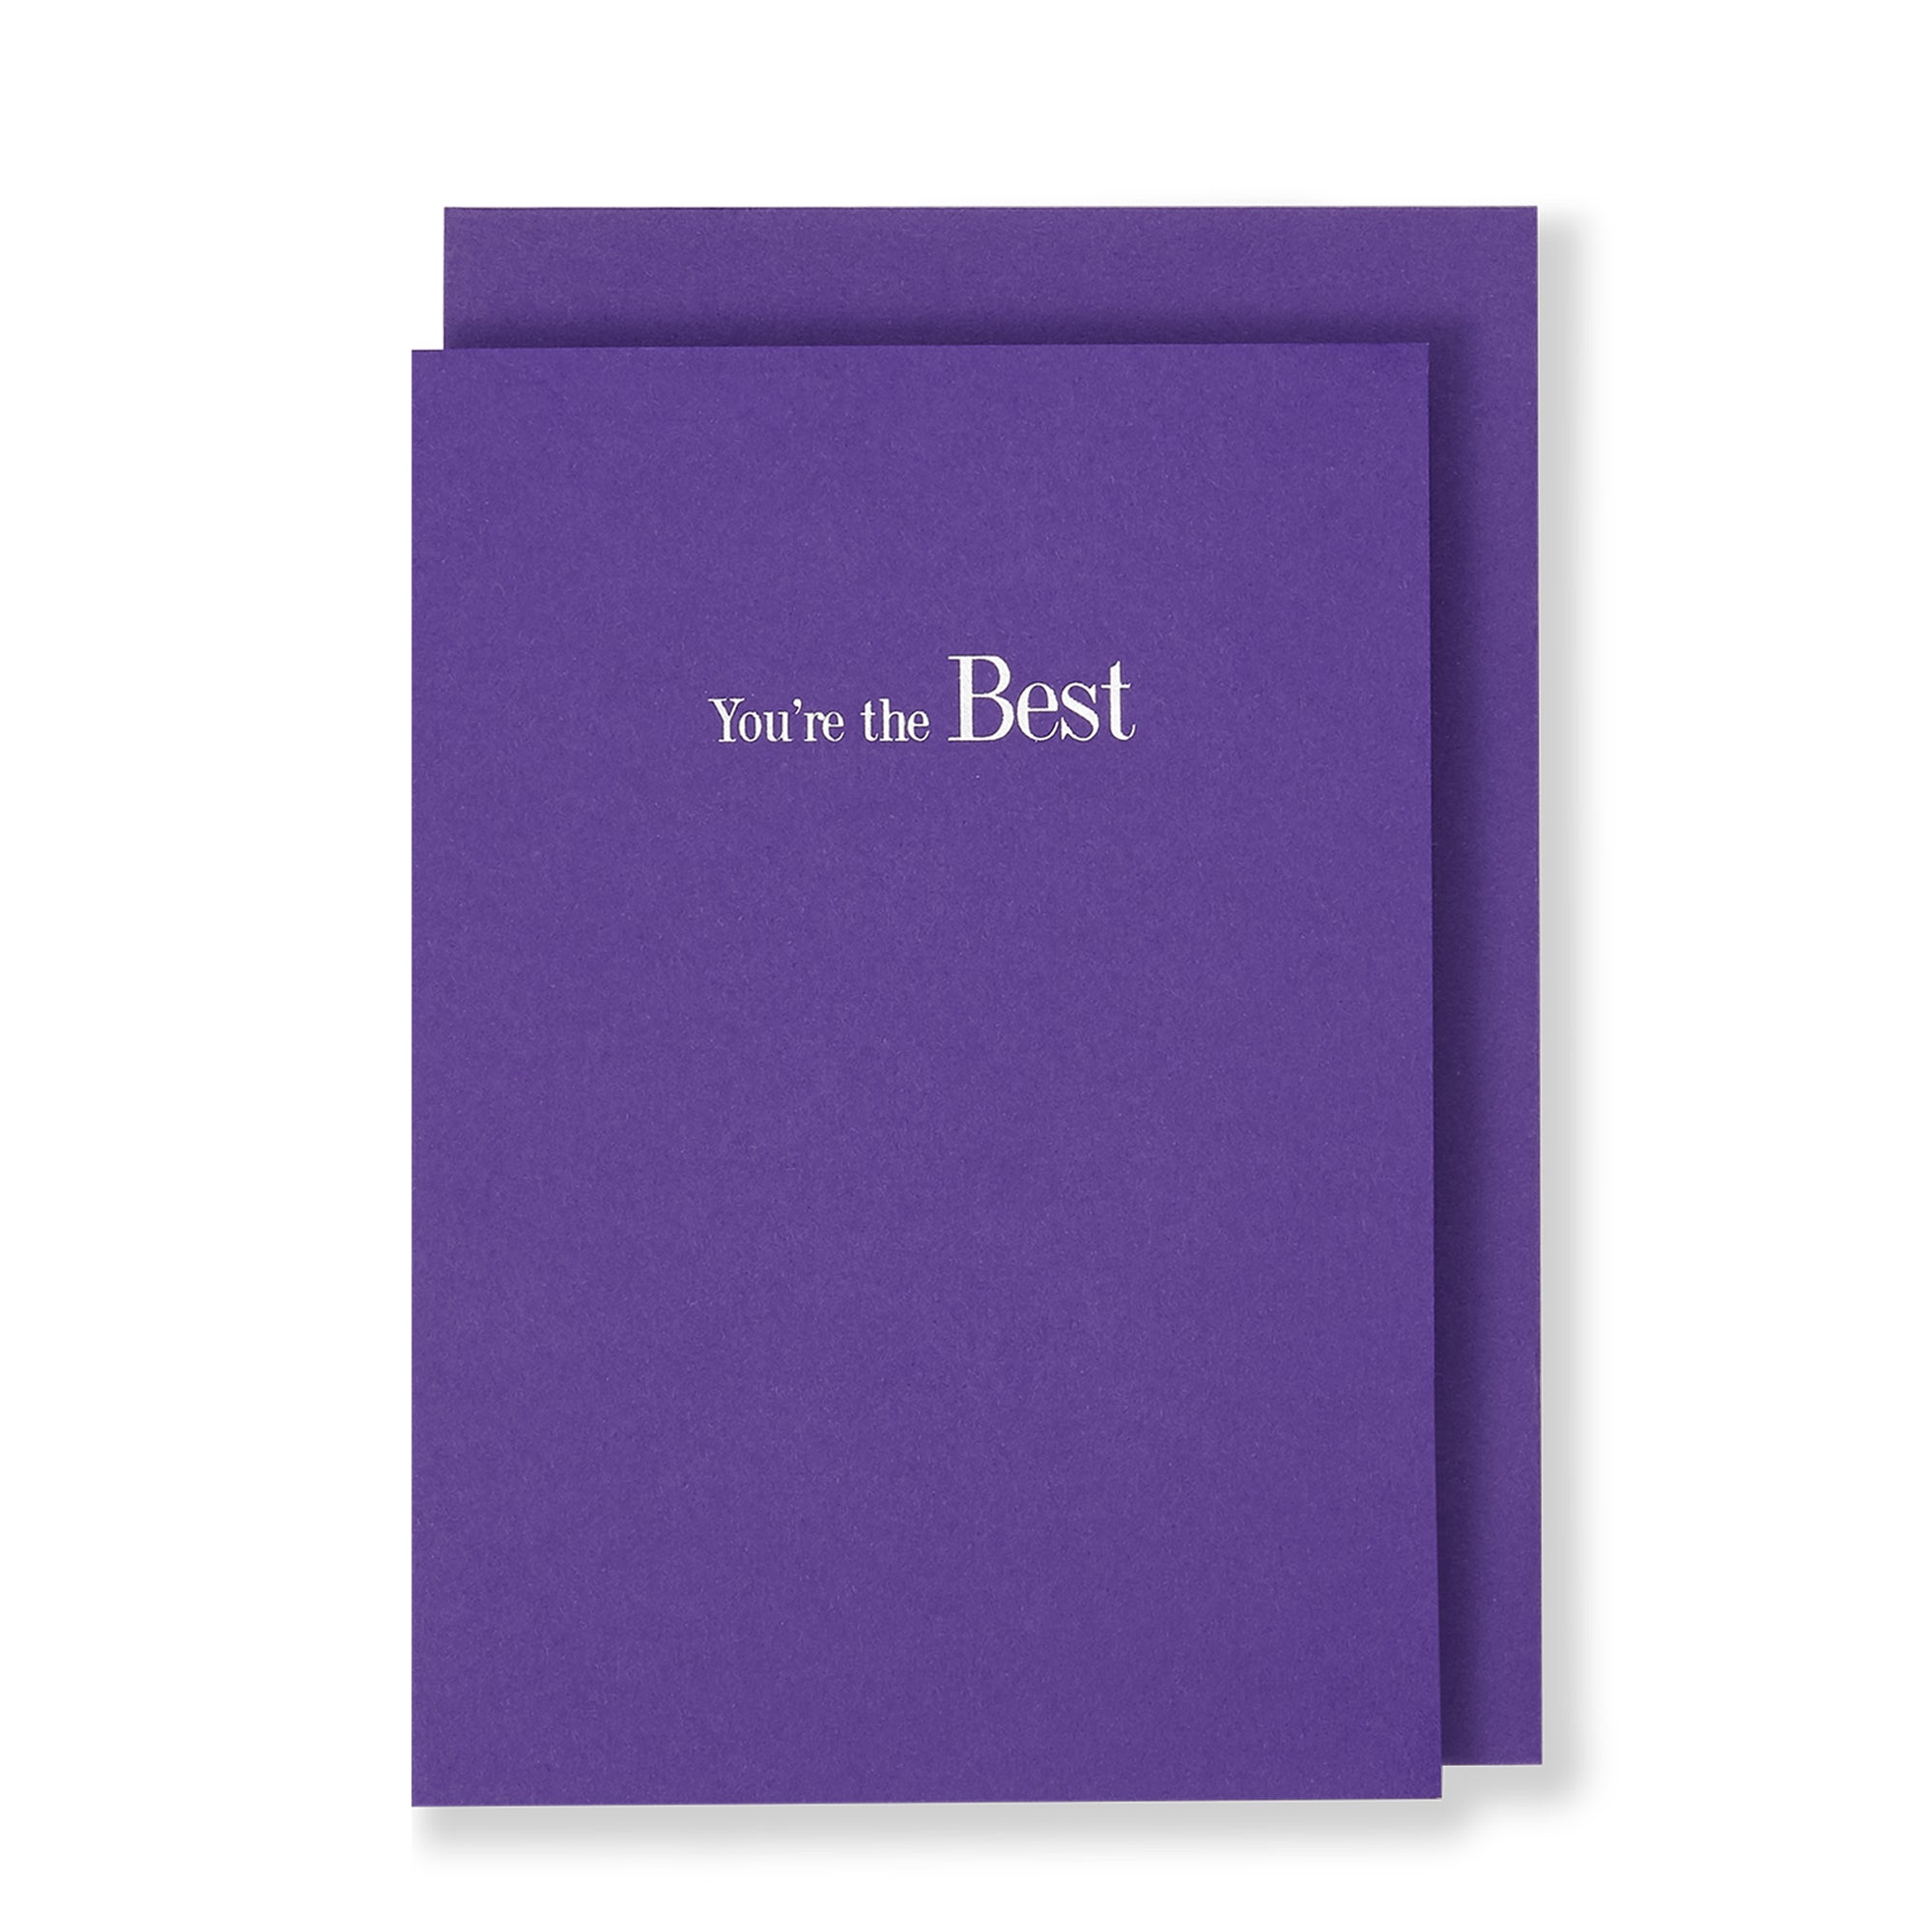 You're The Best Greeting Card in Warm Purple, Front